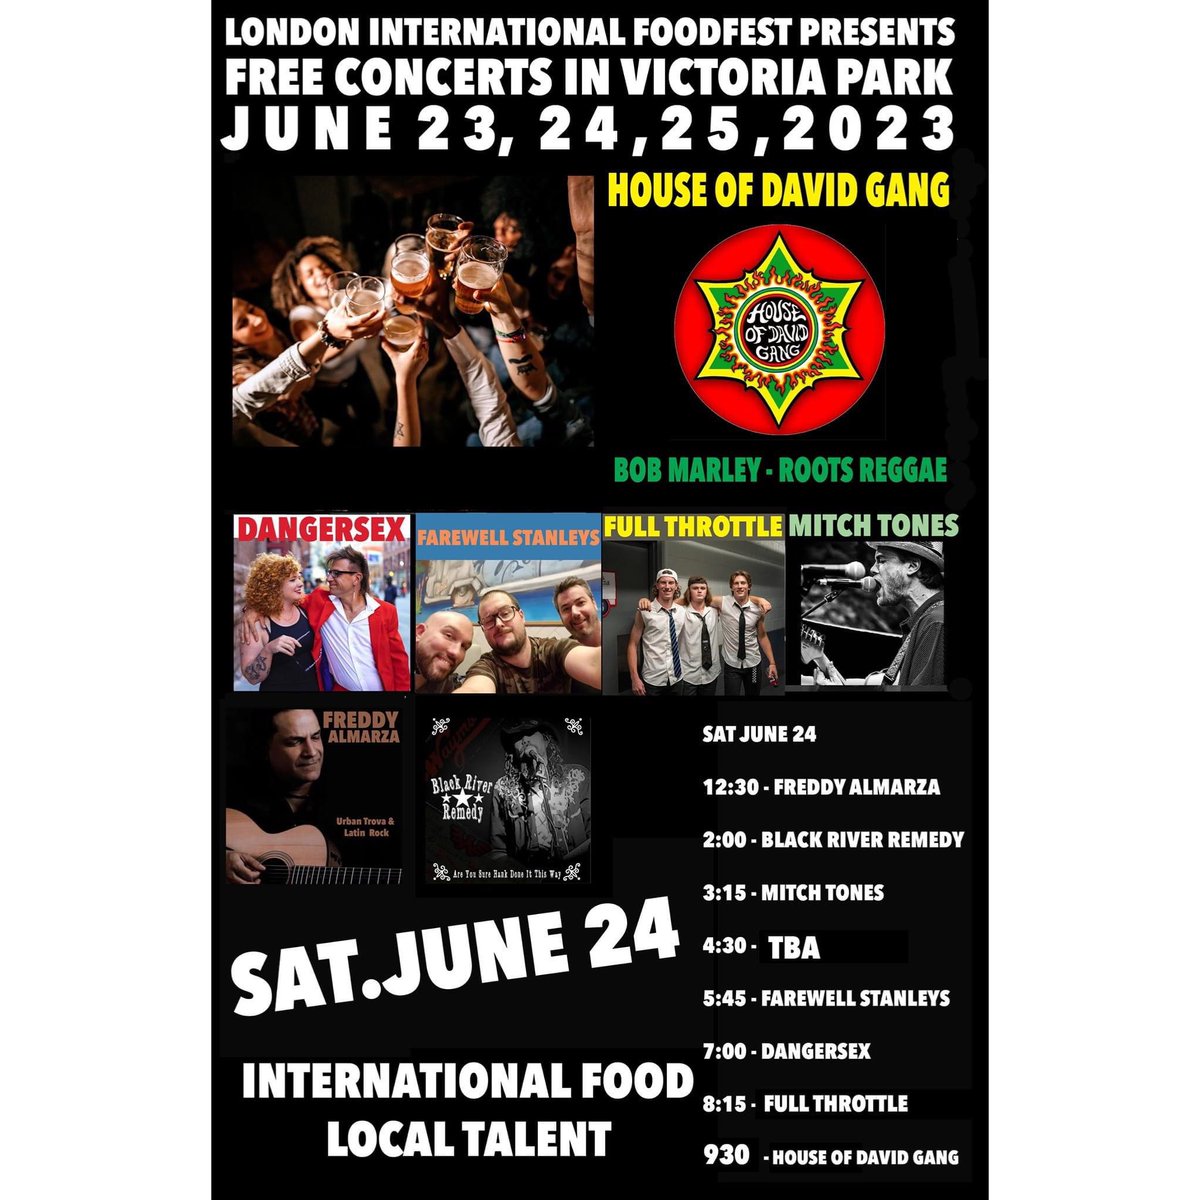 Today we rock London International Food Fest in Victoria Park at 5:45pm! Lots of great acts playing throughout the weekend! Our goal: don’t eat too much before we play lol! After…eat after #internationalfoodfestival2023 #victoriaparklondon